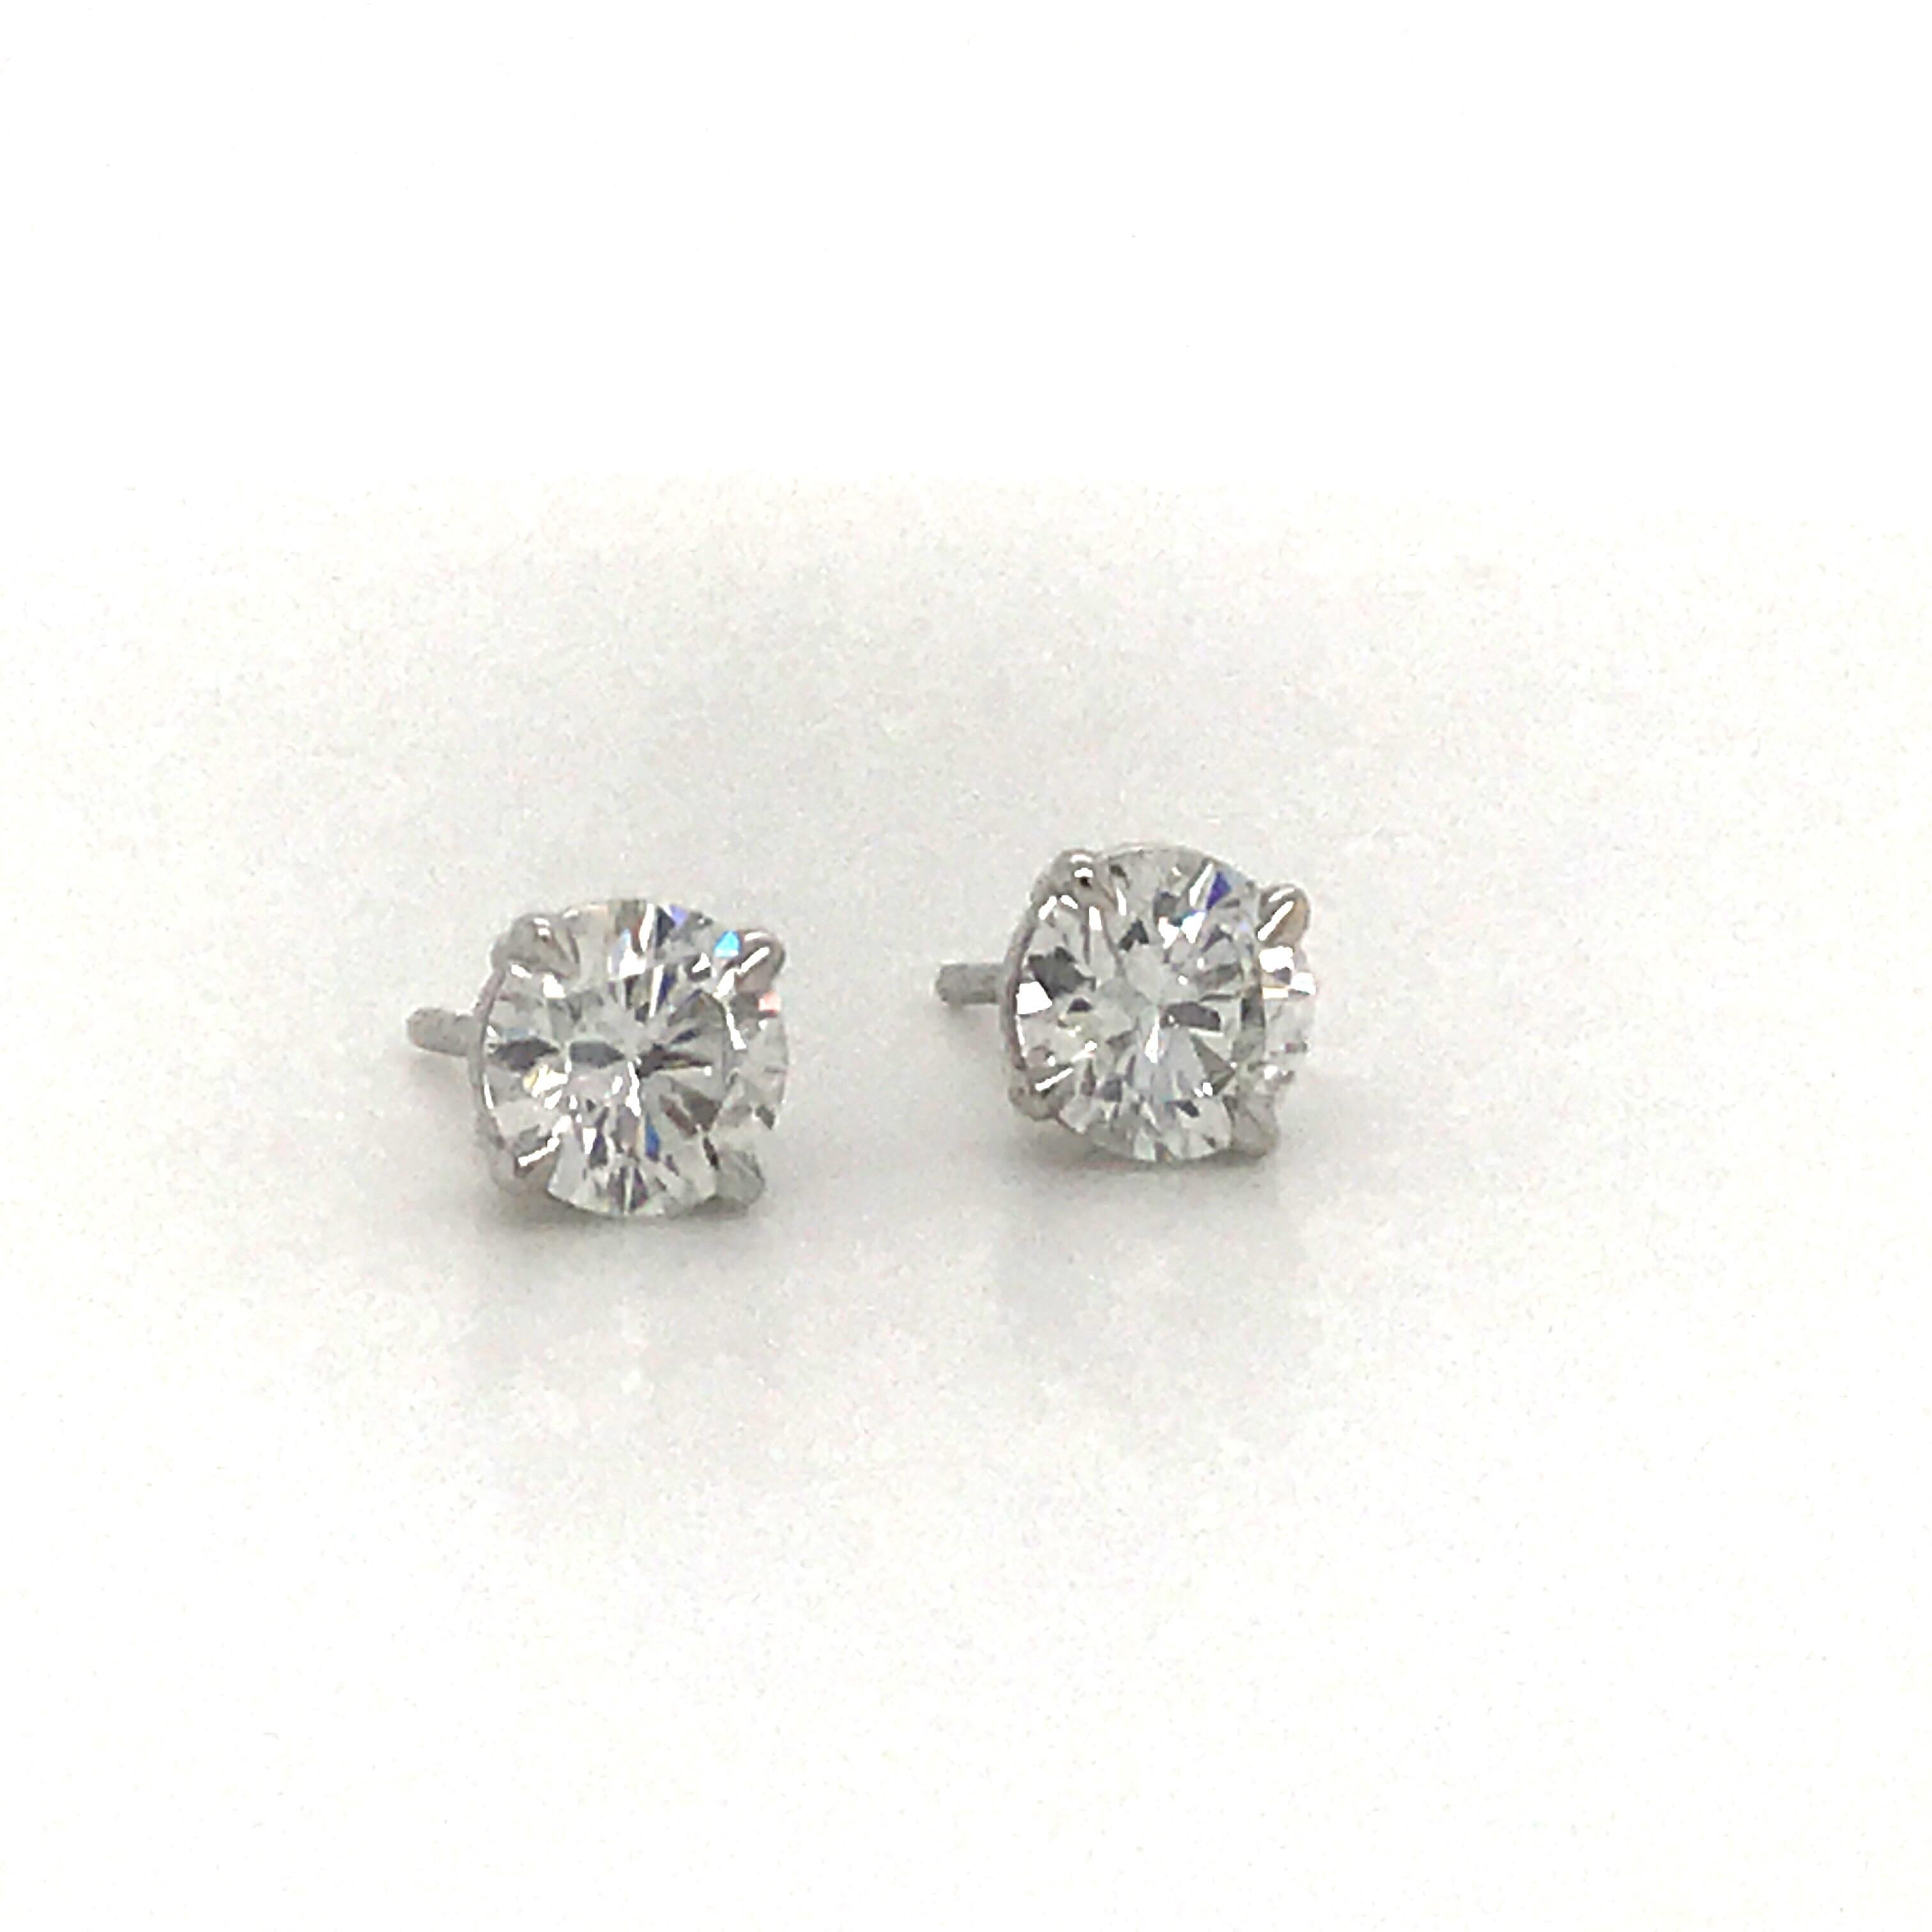 Diamond stud earrings weighing 1.43 carats in a 14k white gold 4 prong classic setting.
Color F-G
Clartiy SI3-I1